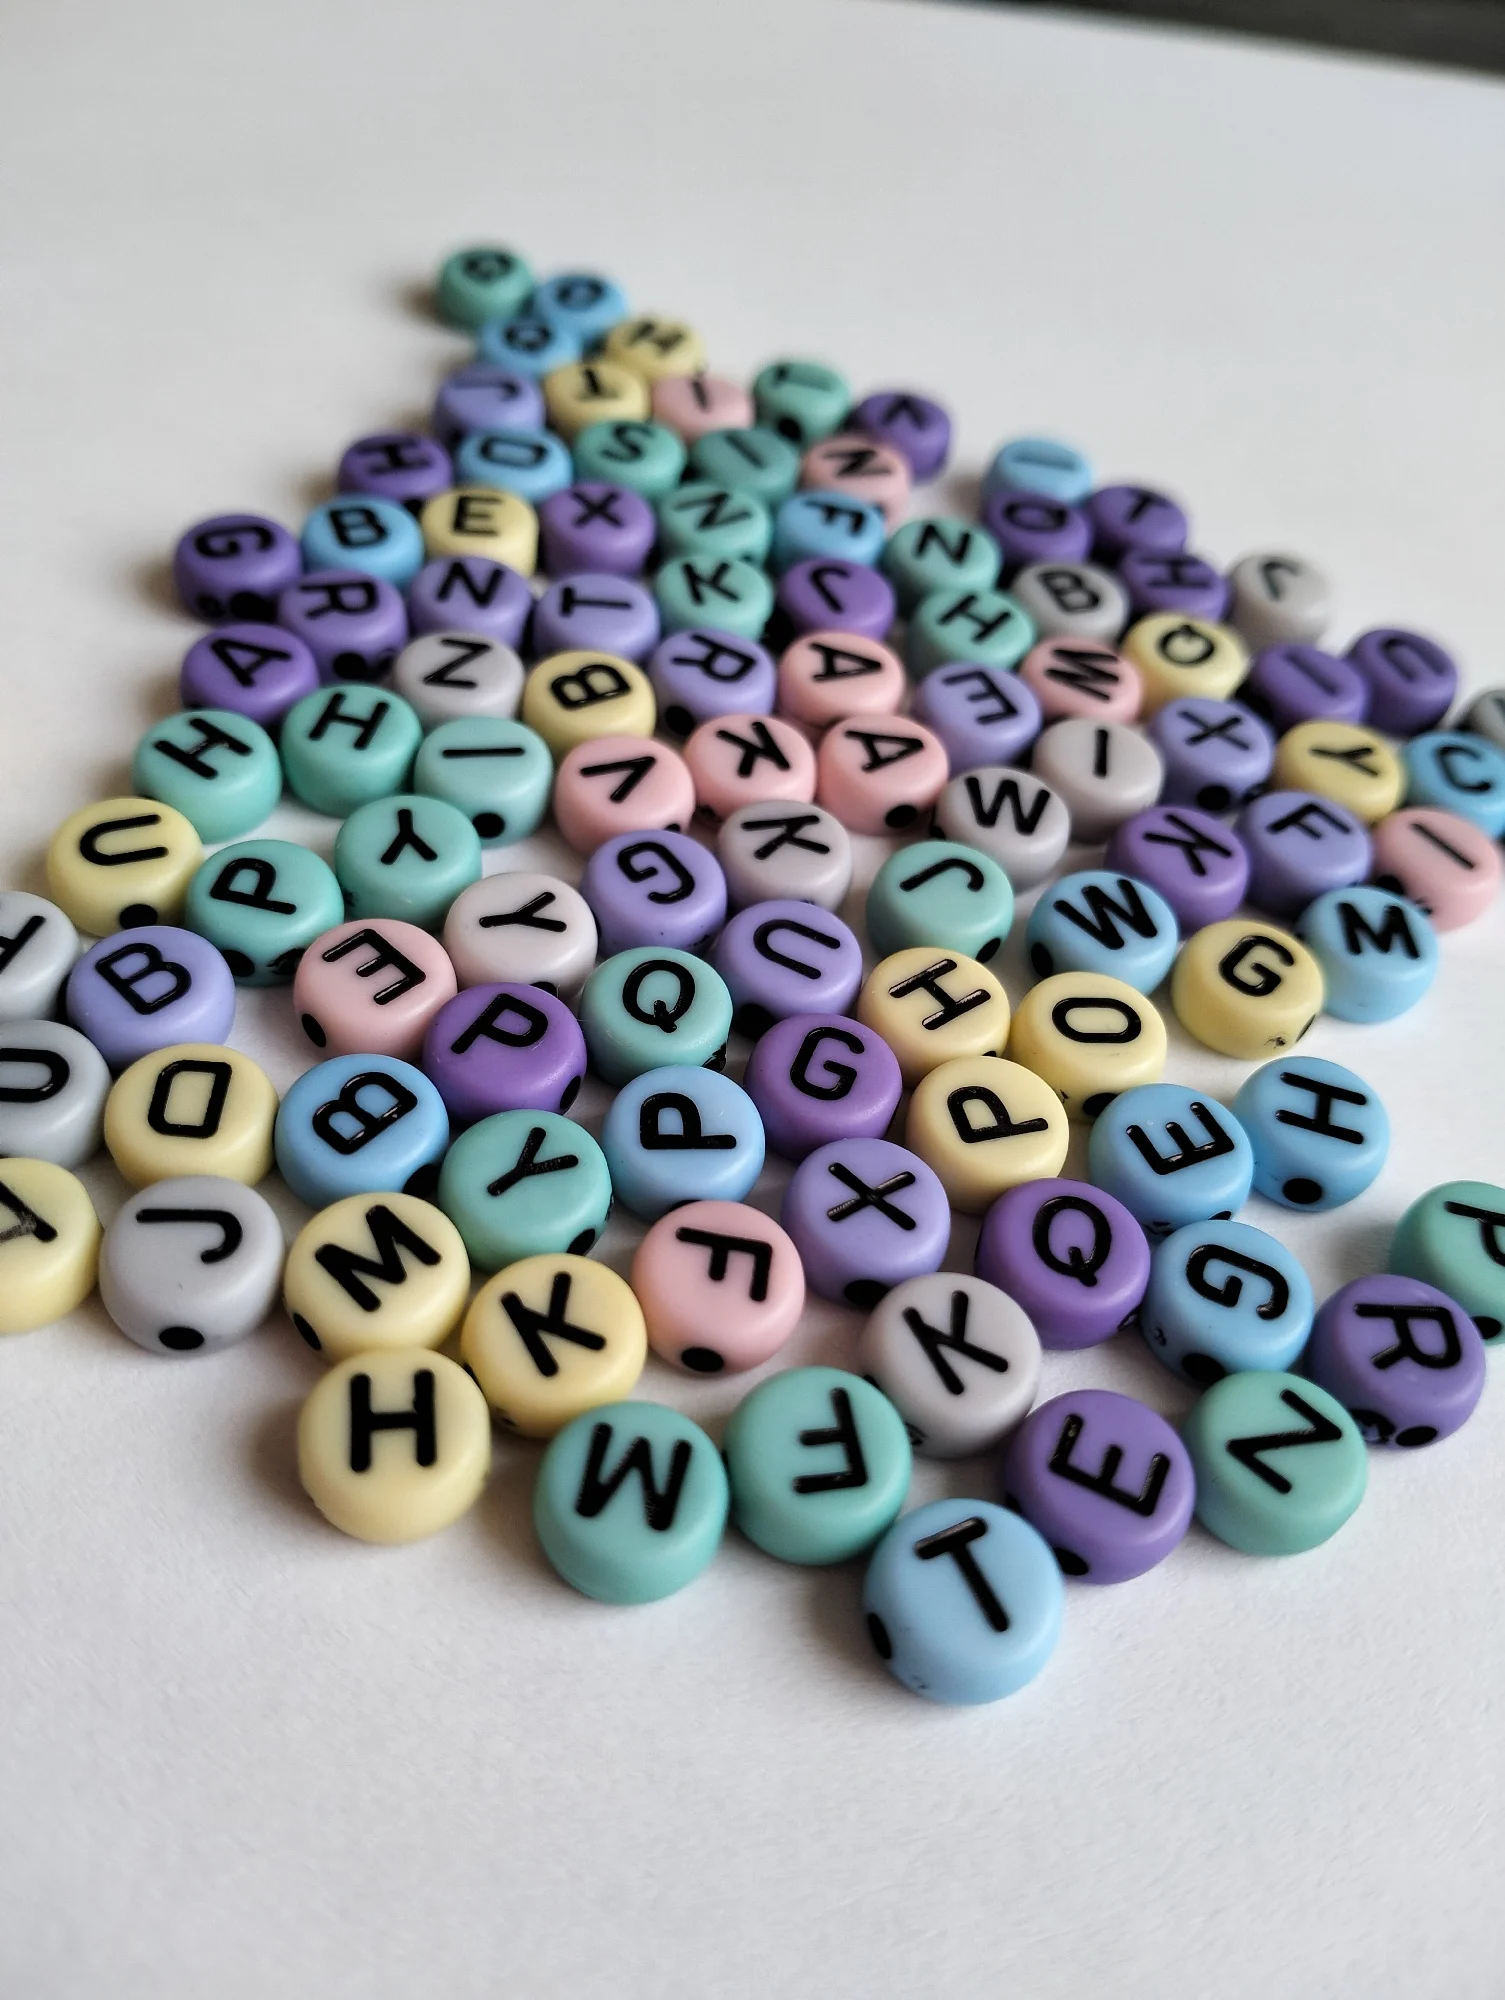 100pcs/Lot Mixed Round Flat Acrylic Letter Beads Alphabet Digital Cube Loose Spacer Beads For Jewelry Making Diy Bracelet photo review